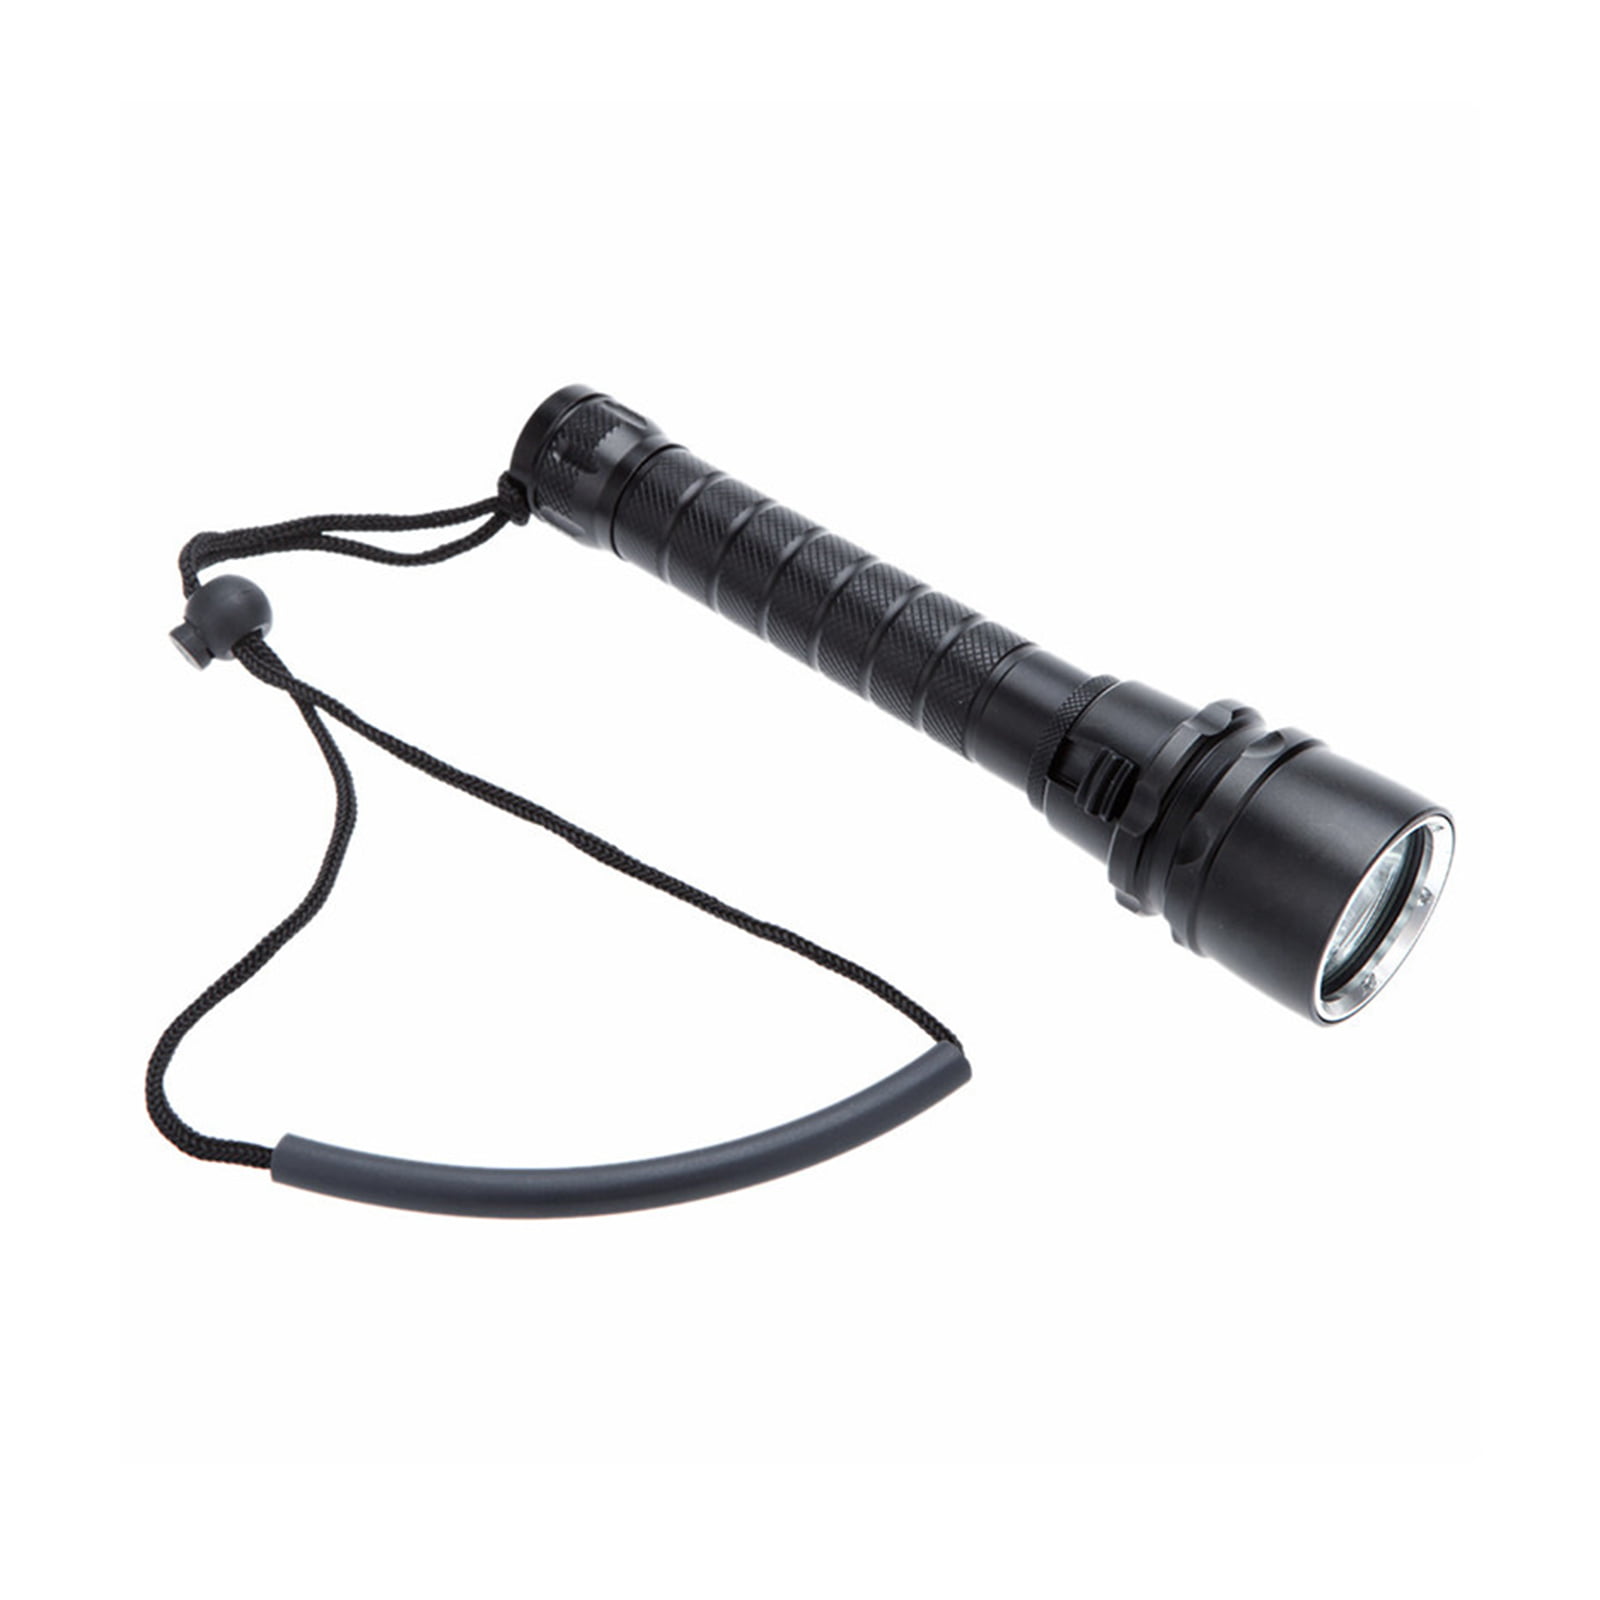 LED Diving Flashlights CREE T6 Lamp Underwater Torch Light With Wrist Strap 